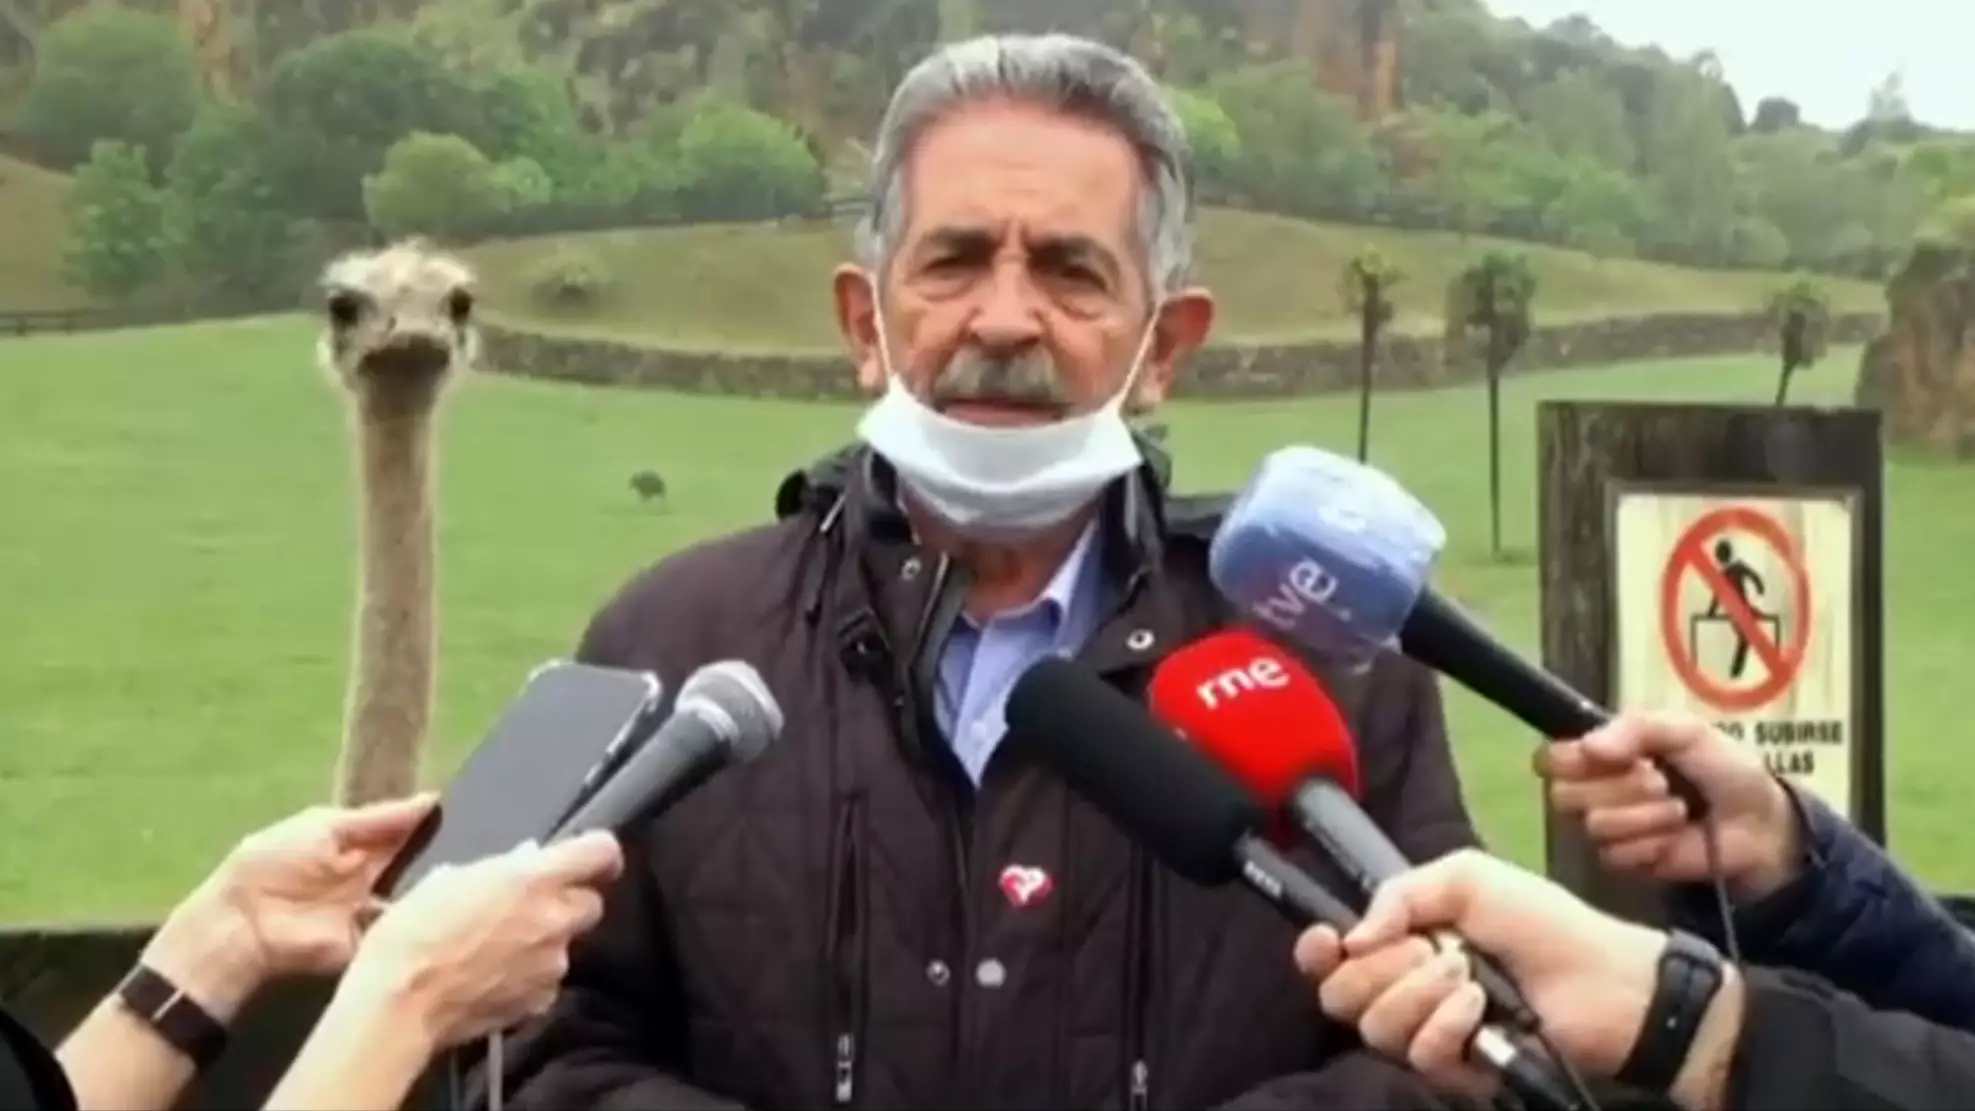 Ostrich Hilariously Photobombs Politician During Broadcast 